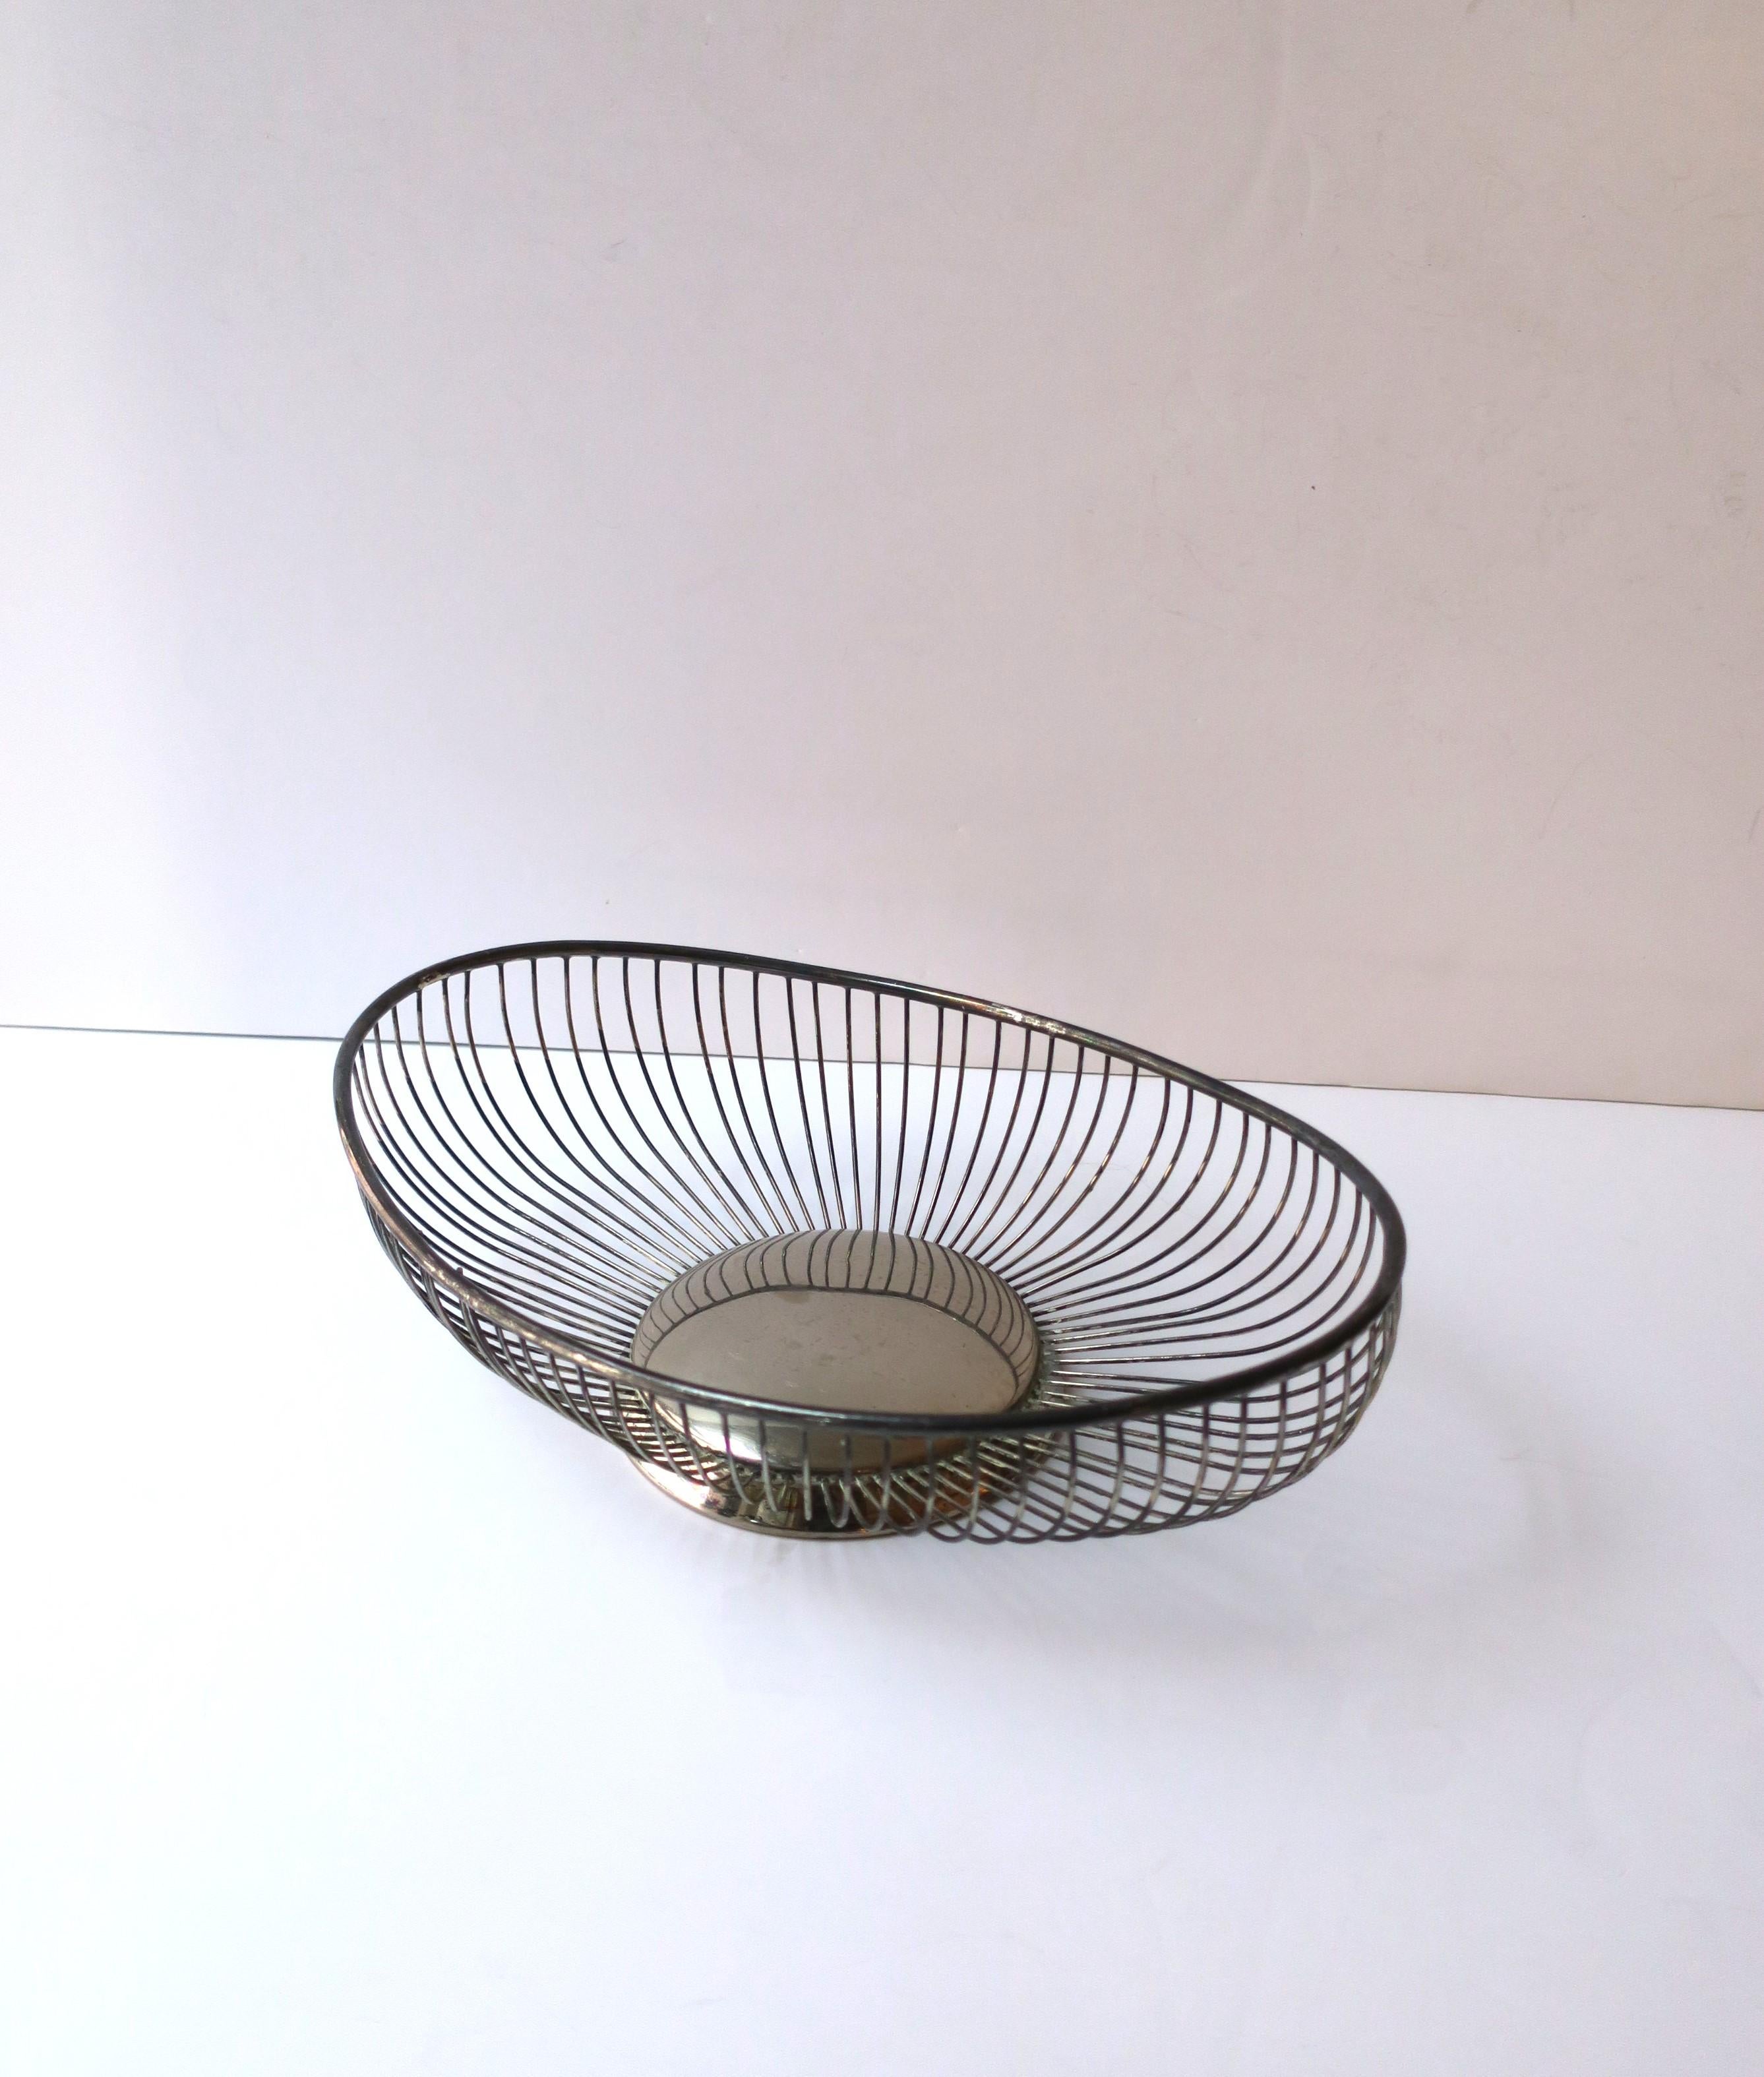 A beautiful sterling silver plate oval wire basket, Midcentury Modern period, Italy. A great basket for bread, fruits, vegetables, etc., or as a standalone piece. Dimensions: 7.63